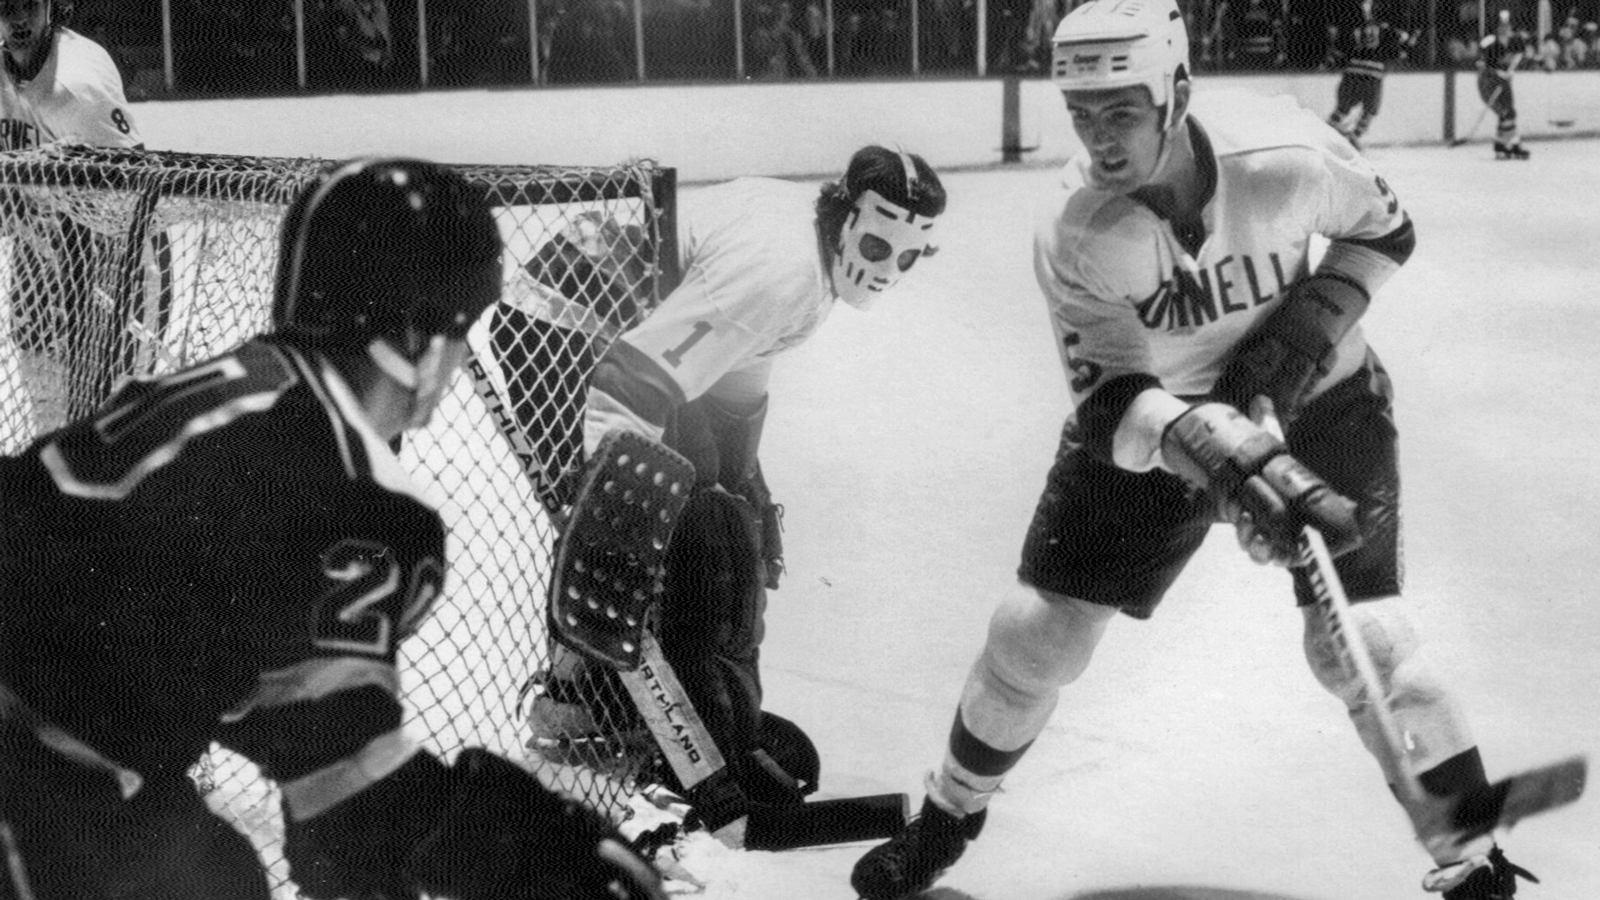 Big Red Hockey action more than a half century ago—complete with the Jason-like goalie mask common at the time